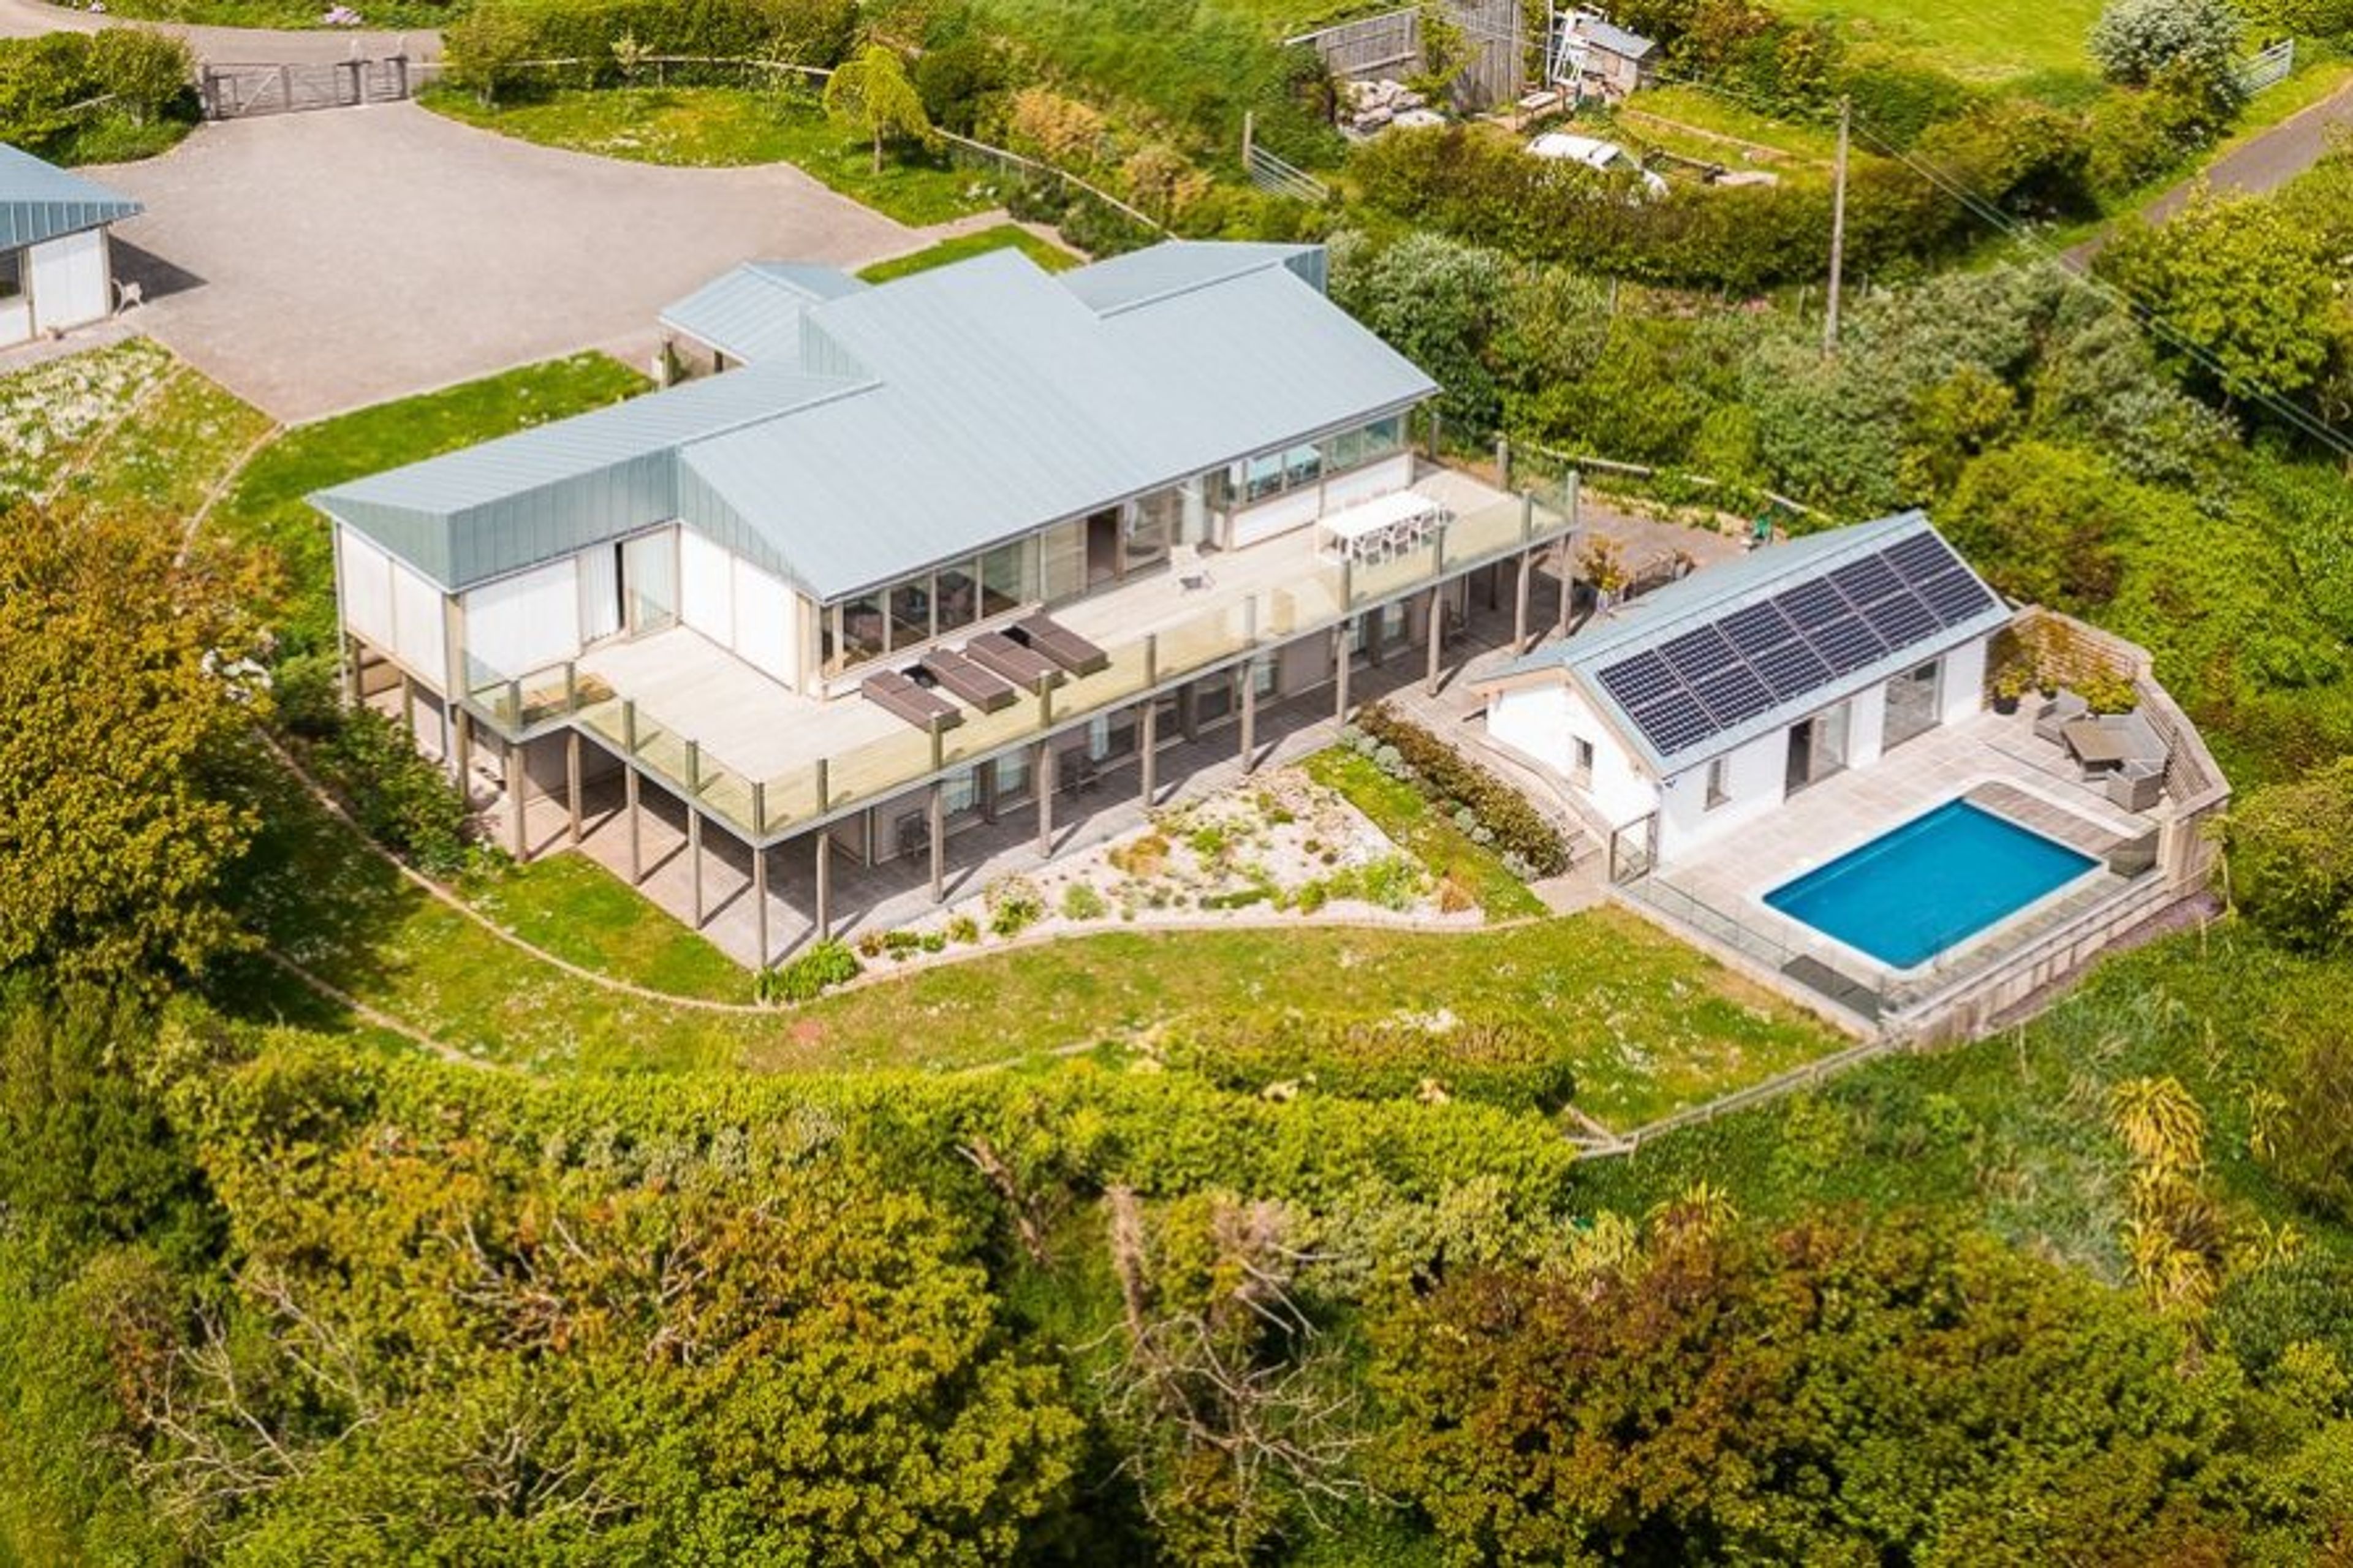 Aerial shot, showing the house, pool, garden and drive.